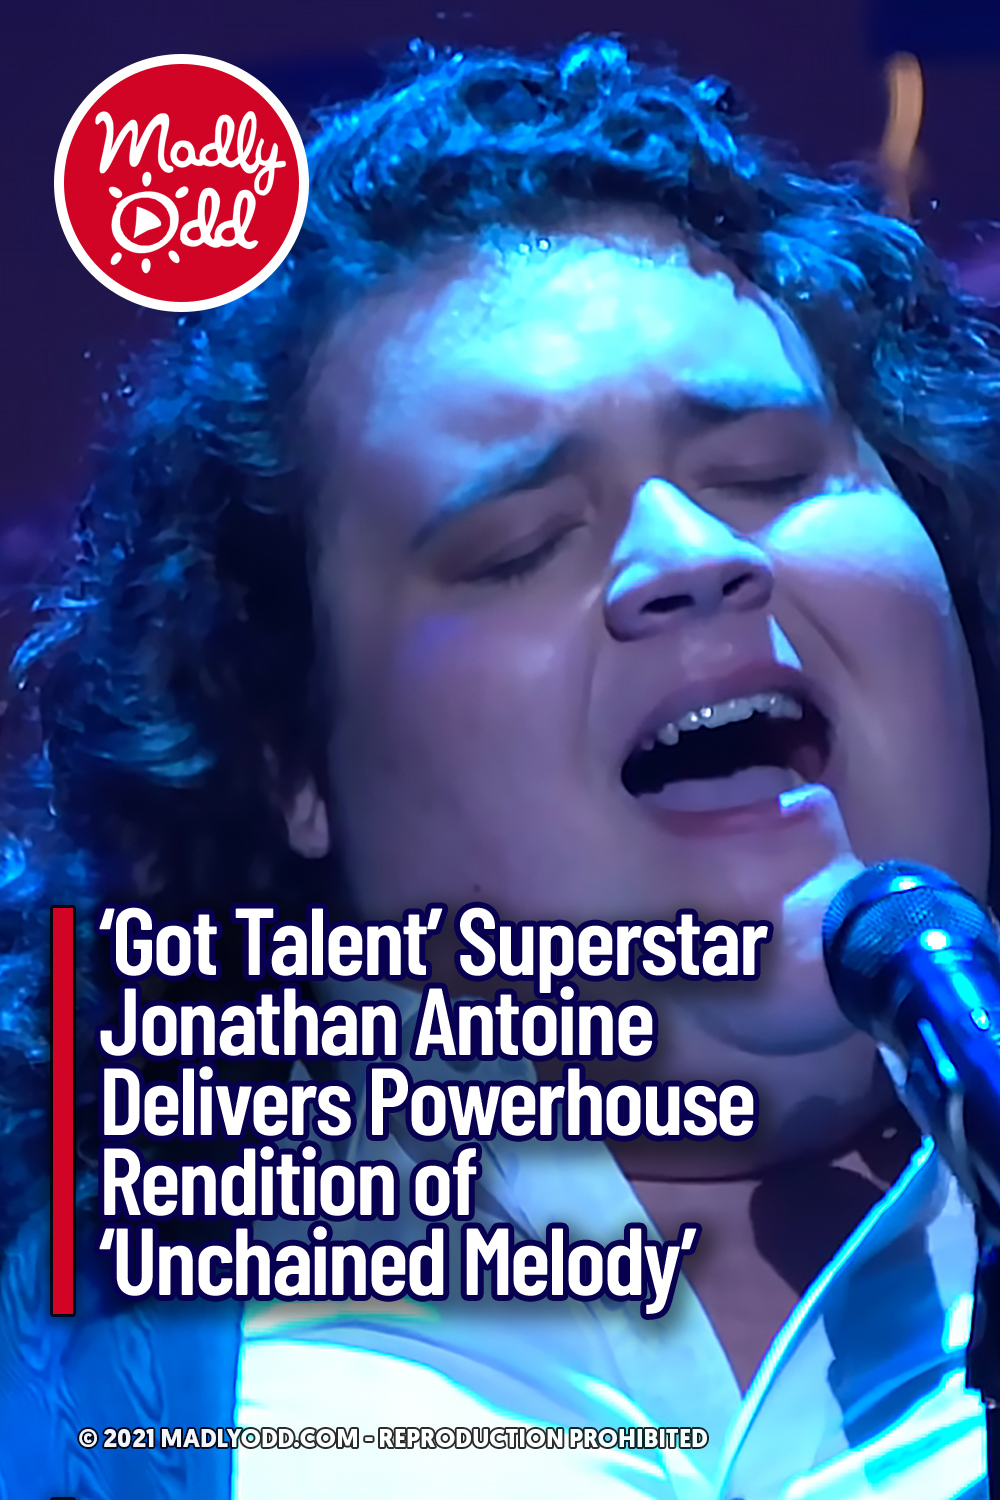 \'Got Talent\' Superstar Jonathan Antoine Delivers Powerhouse Rendition of \'Unchained Melody\'